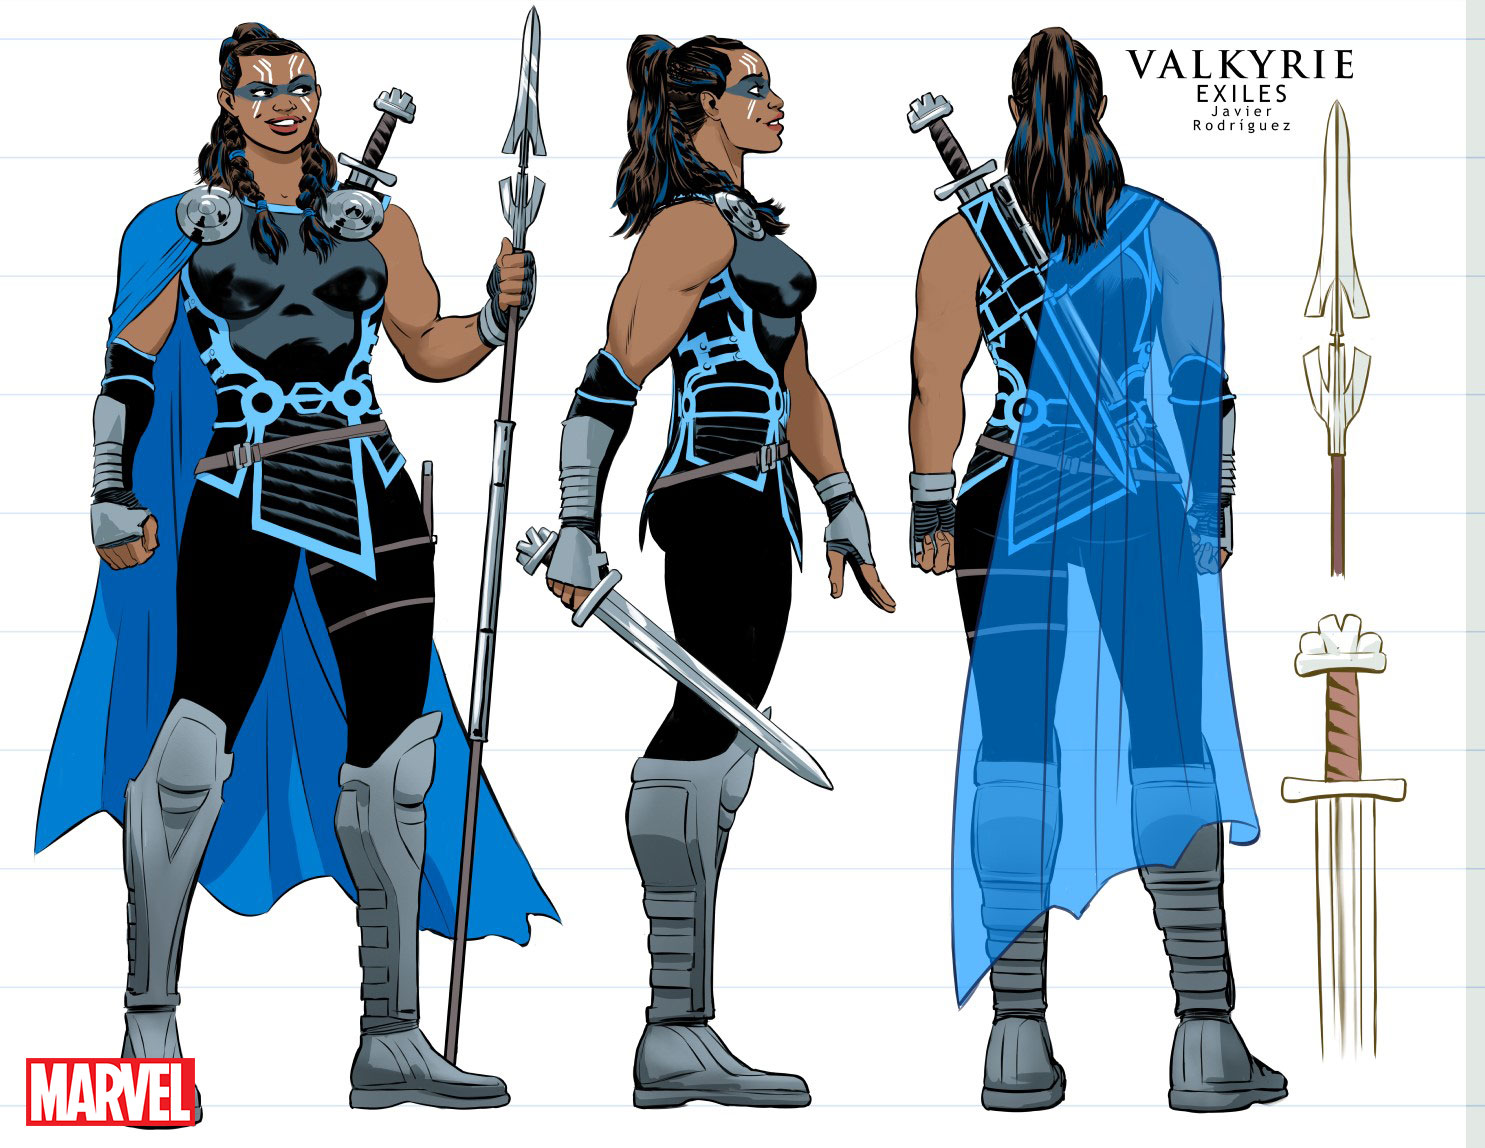 Valkyrie Character design